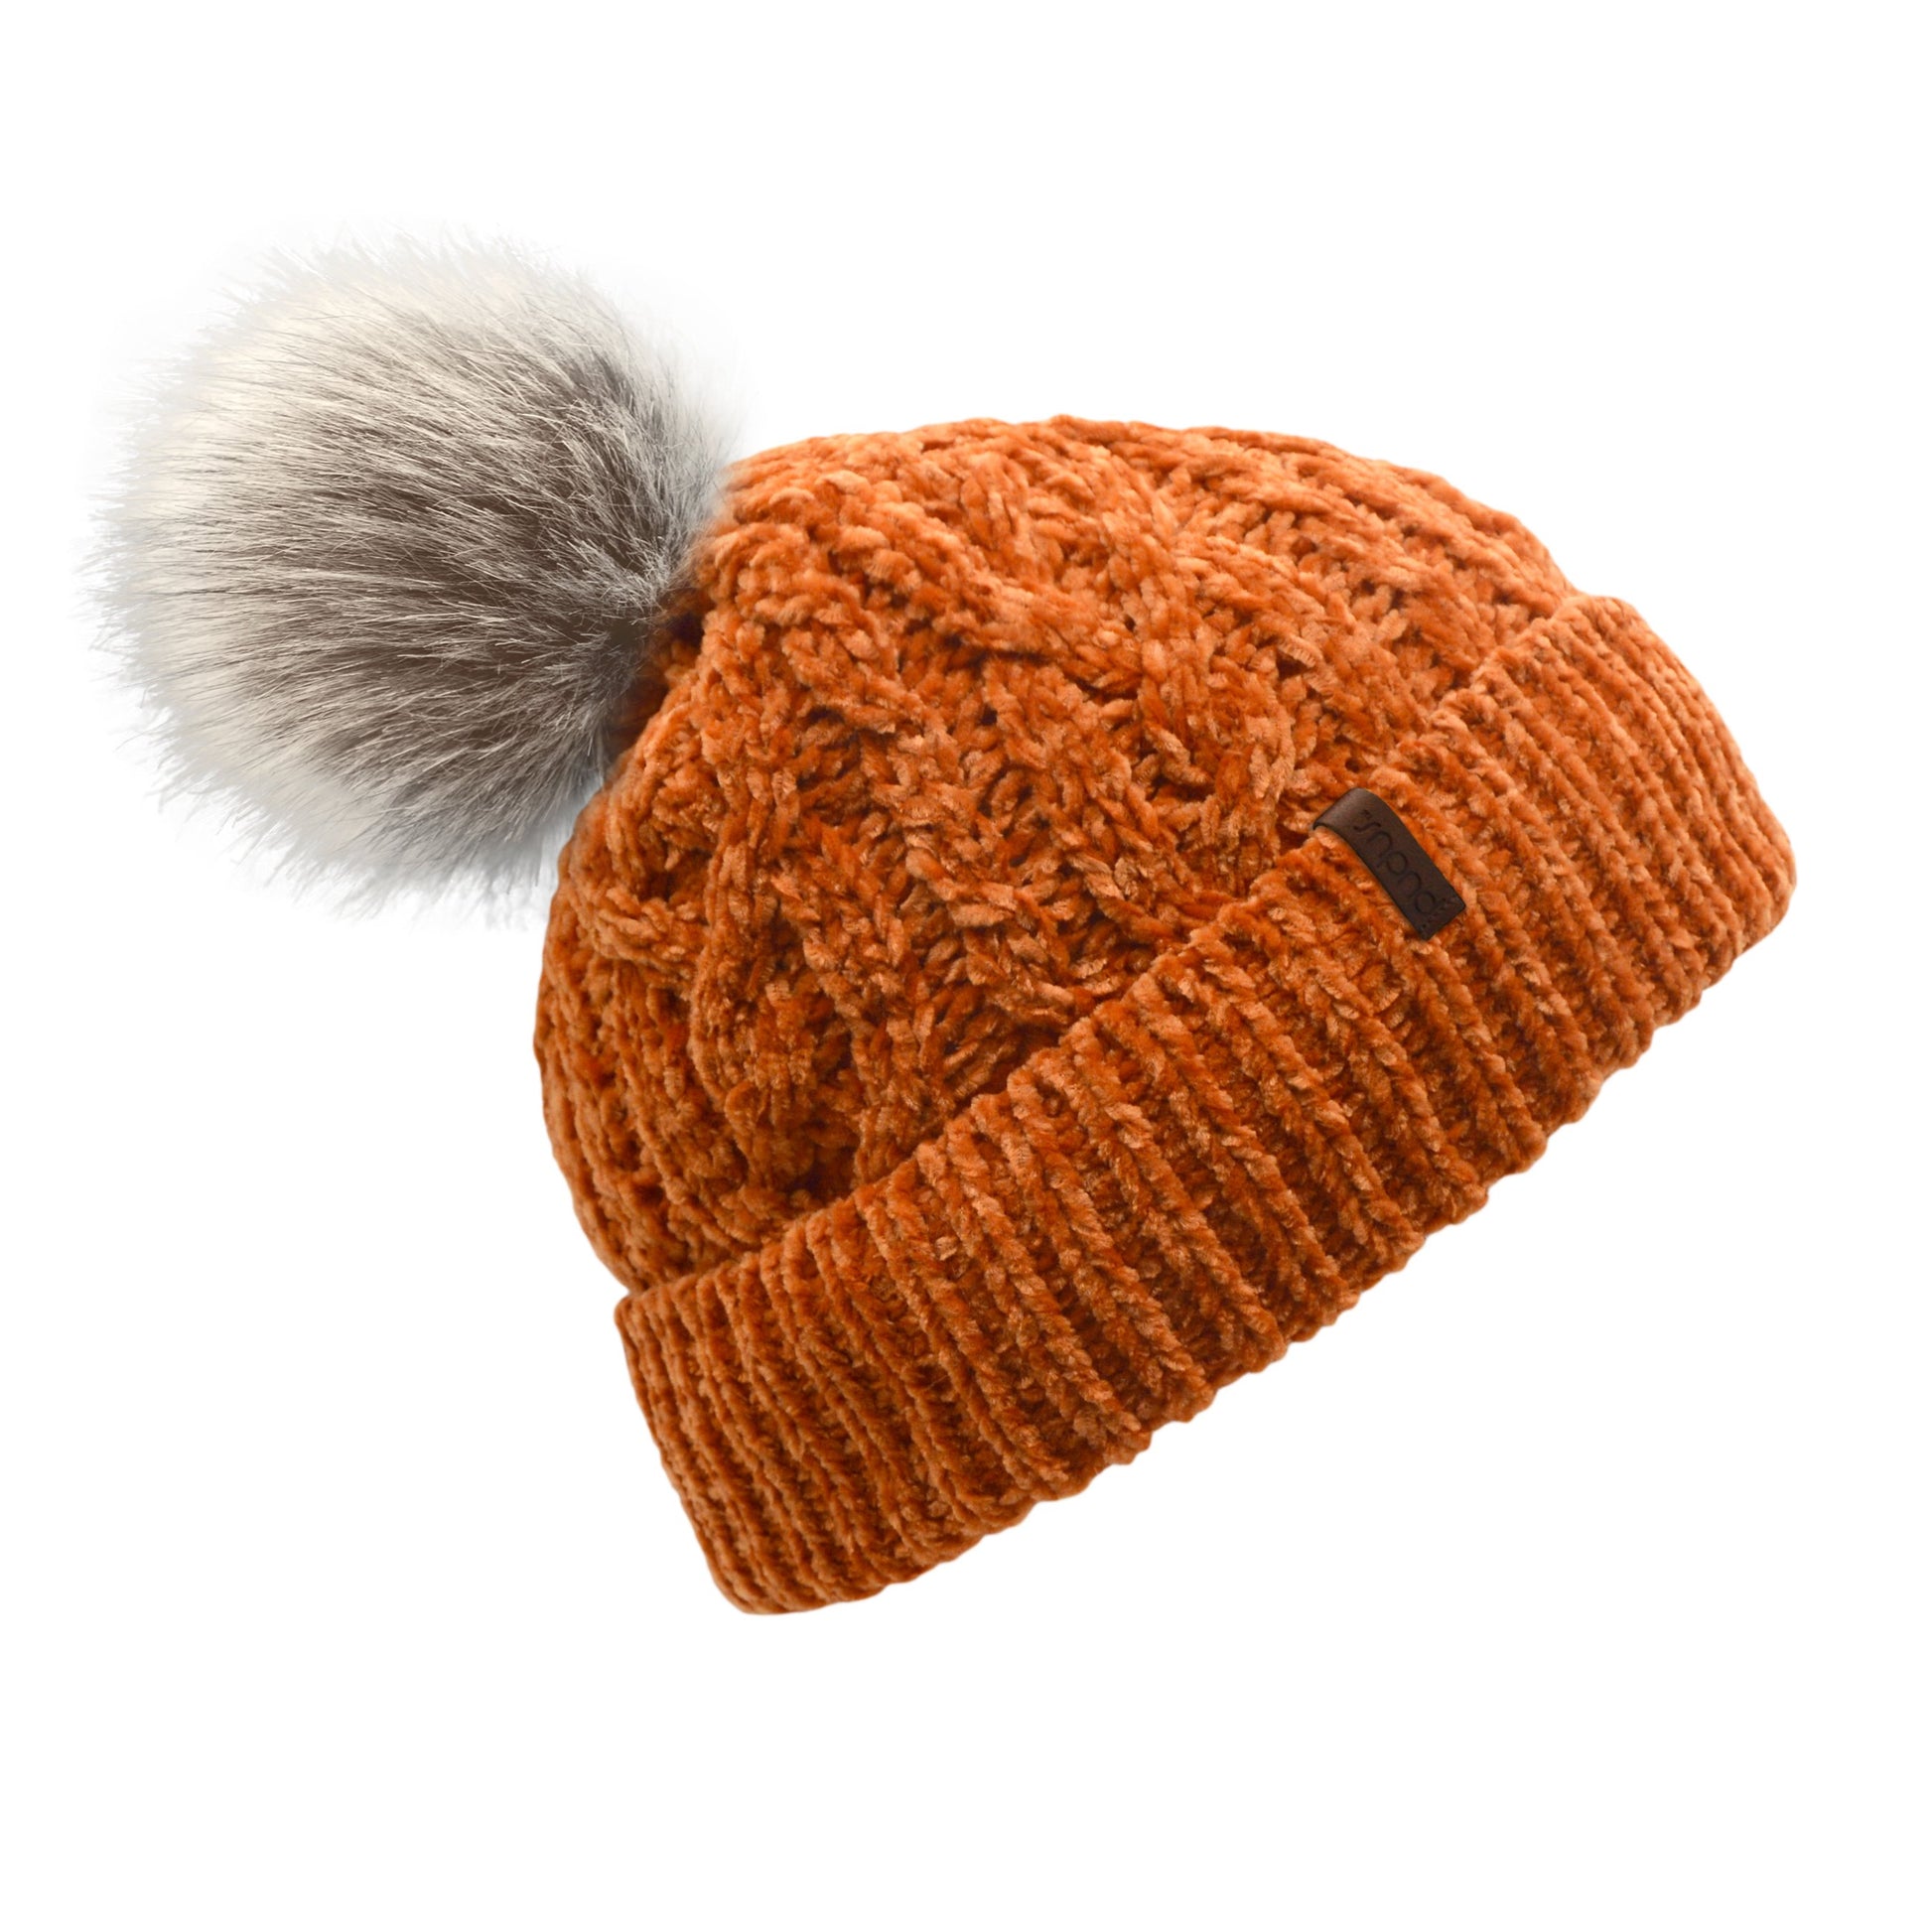 Pudus Women's Winter Beanie Hat in Peach Caramel with Faux Fur Pom Pom - Cable Knitted Chenille and Fleece Lined